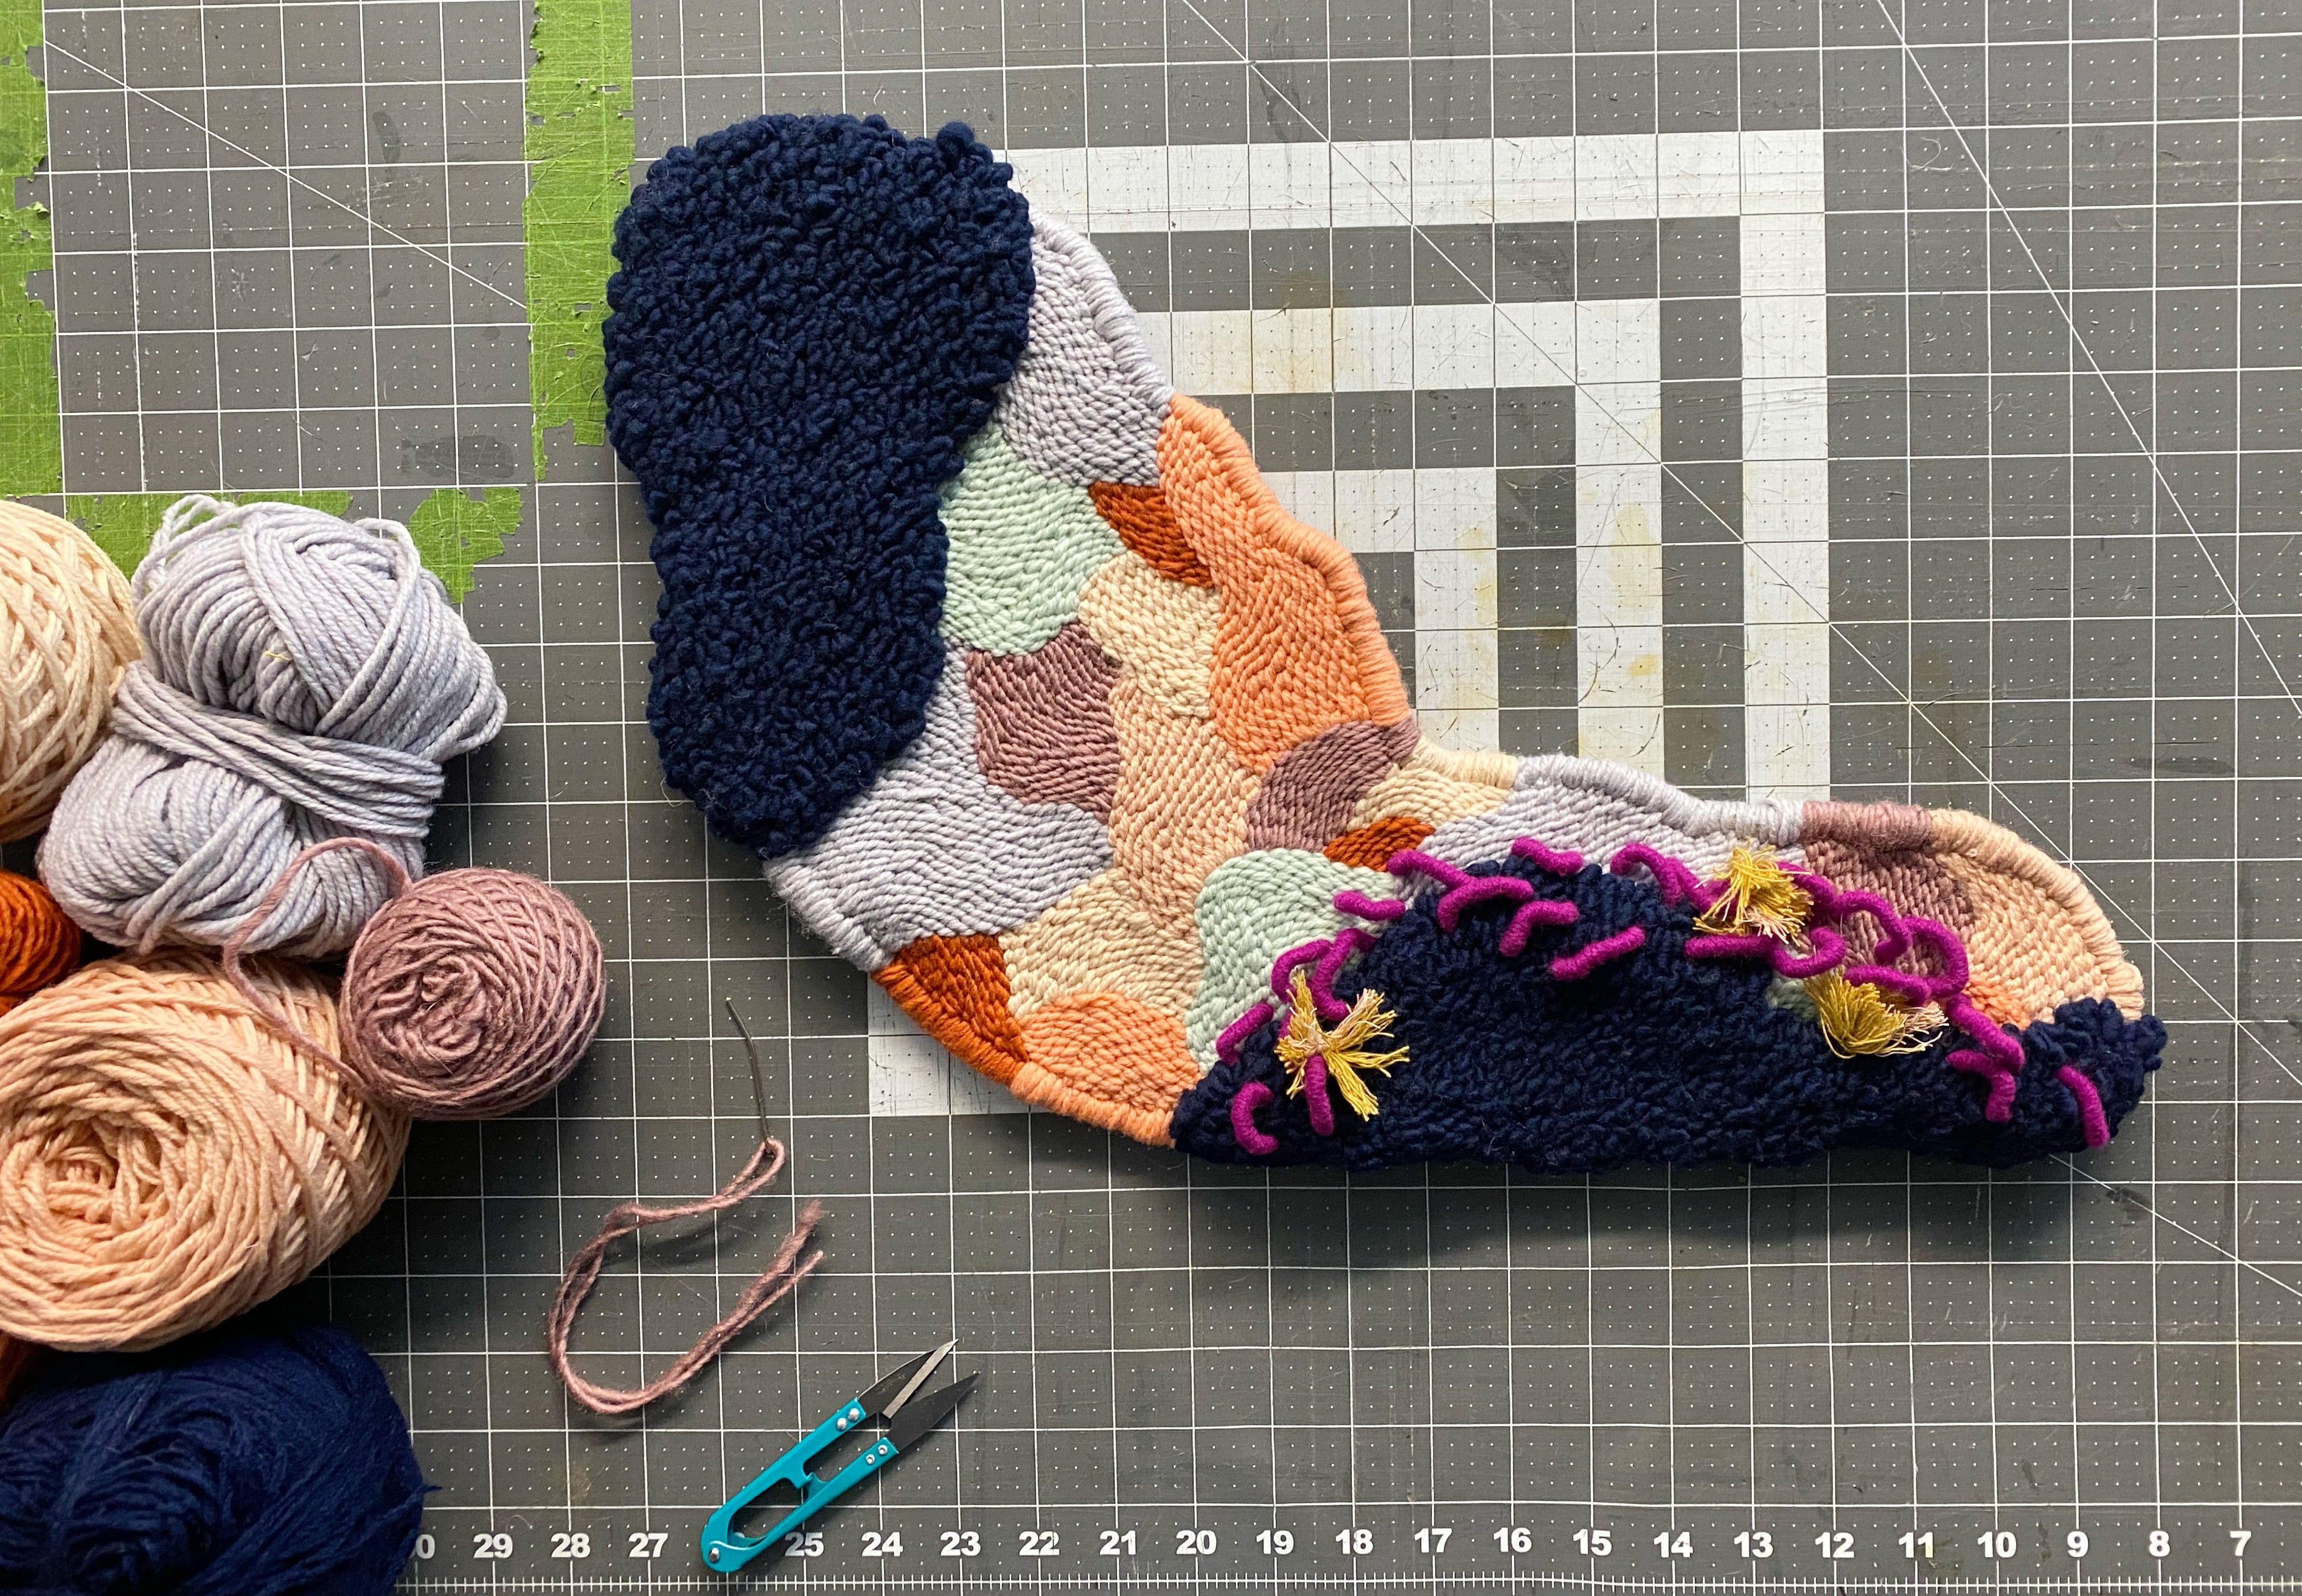 How To Back Punch Needle Projects with Industrial Felt Featuring Katie Berman Tutorial Finished Project